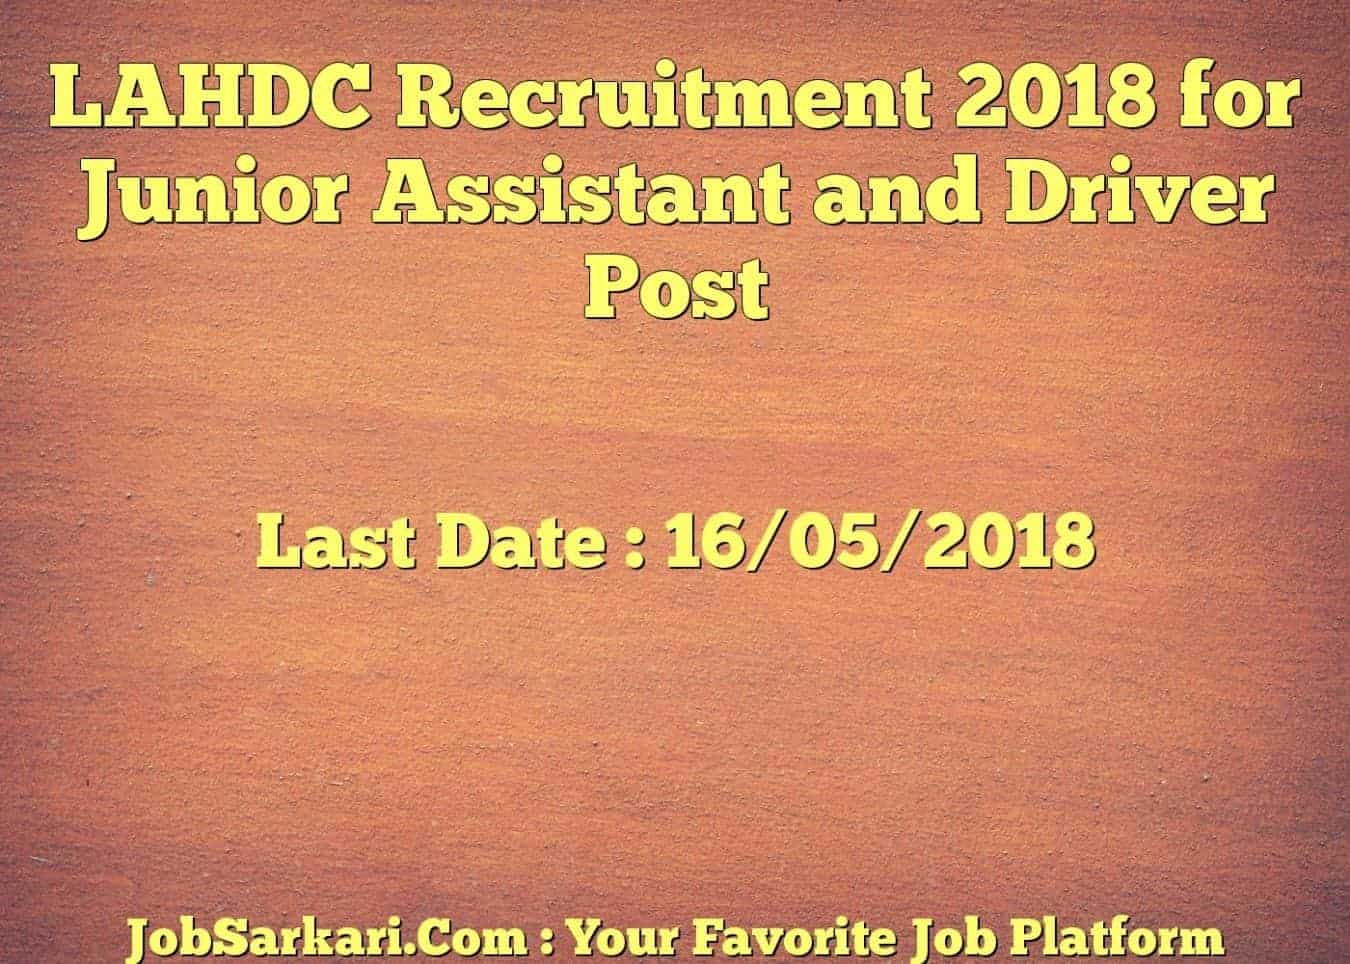 LAHDC Recruitment 2018 for Junior Assistant and Driver Post